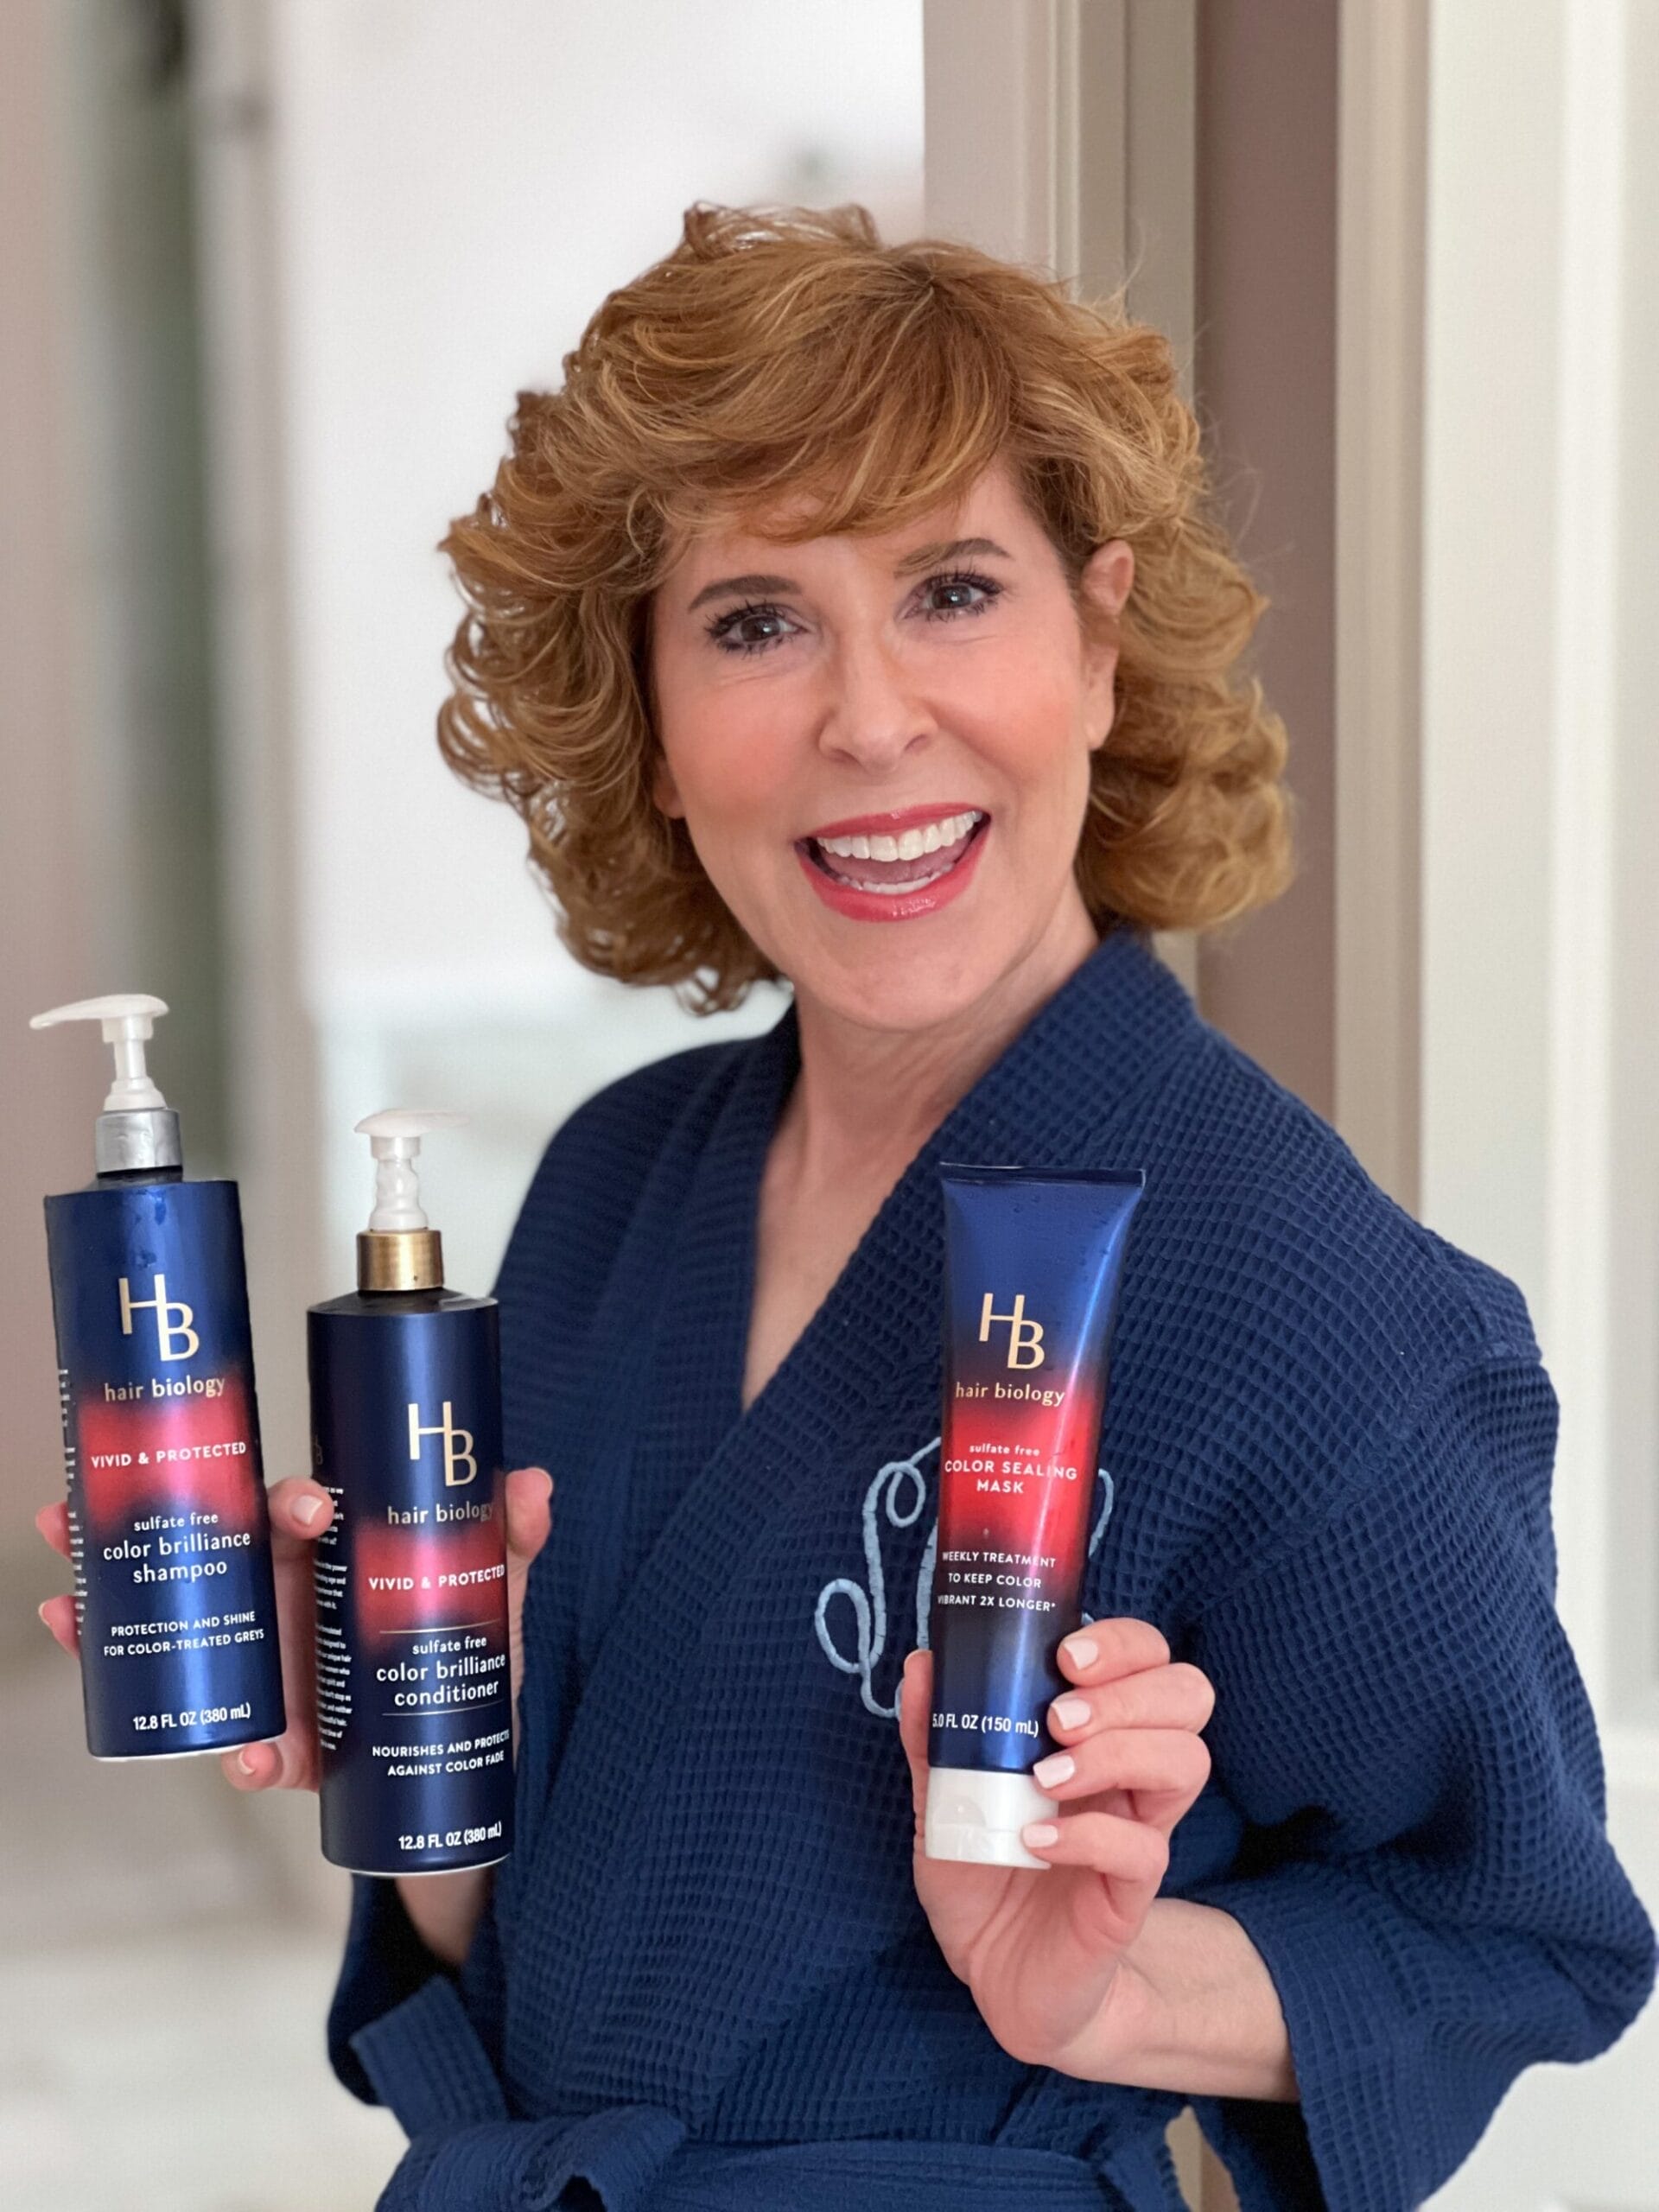 woman over 50 holding hair biology products